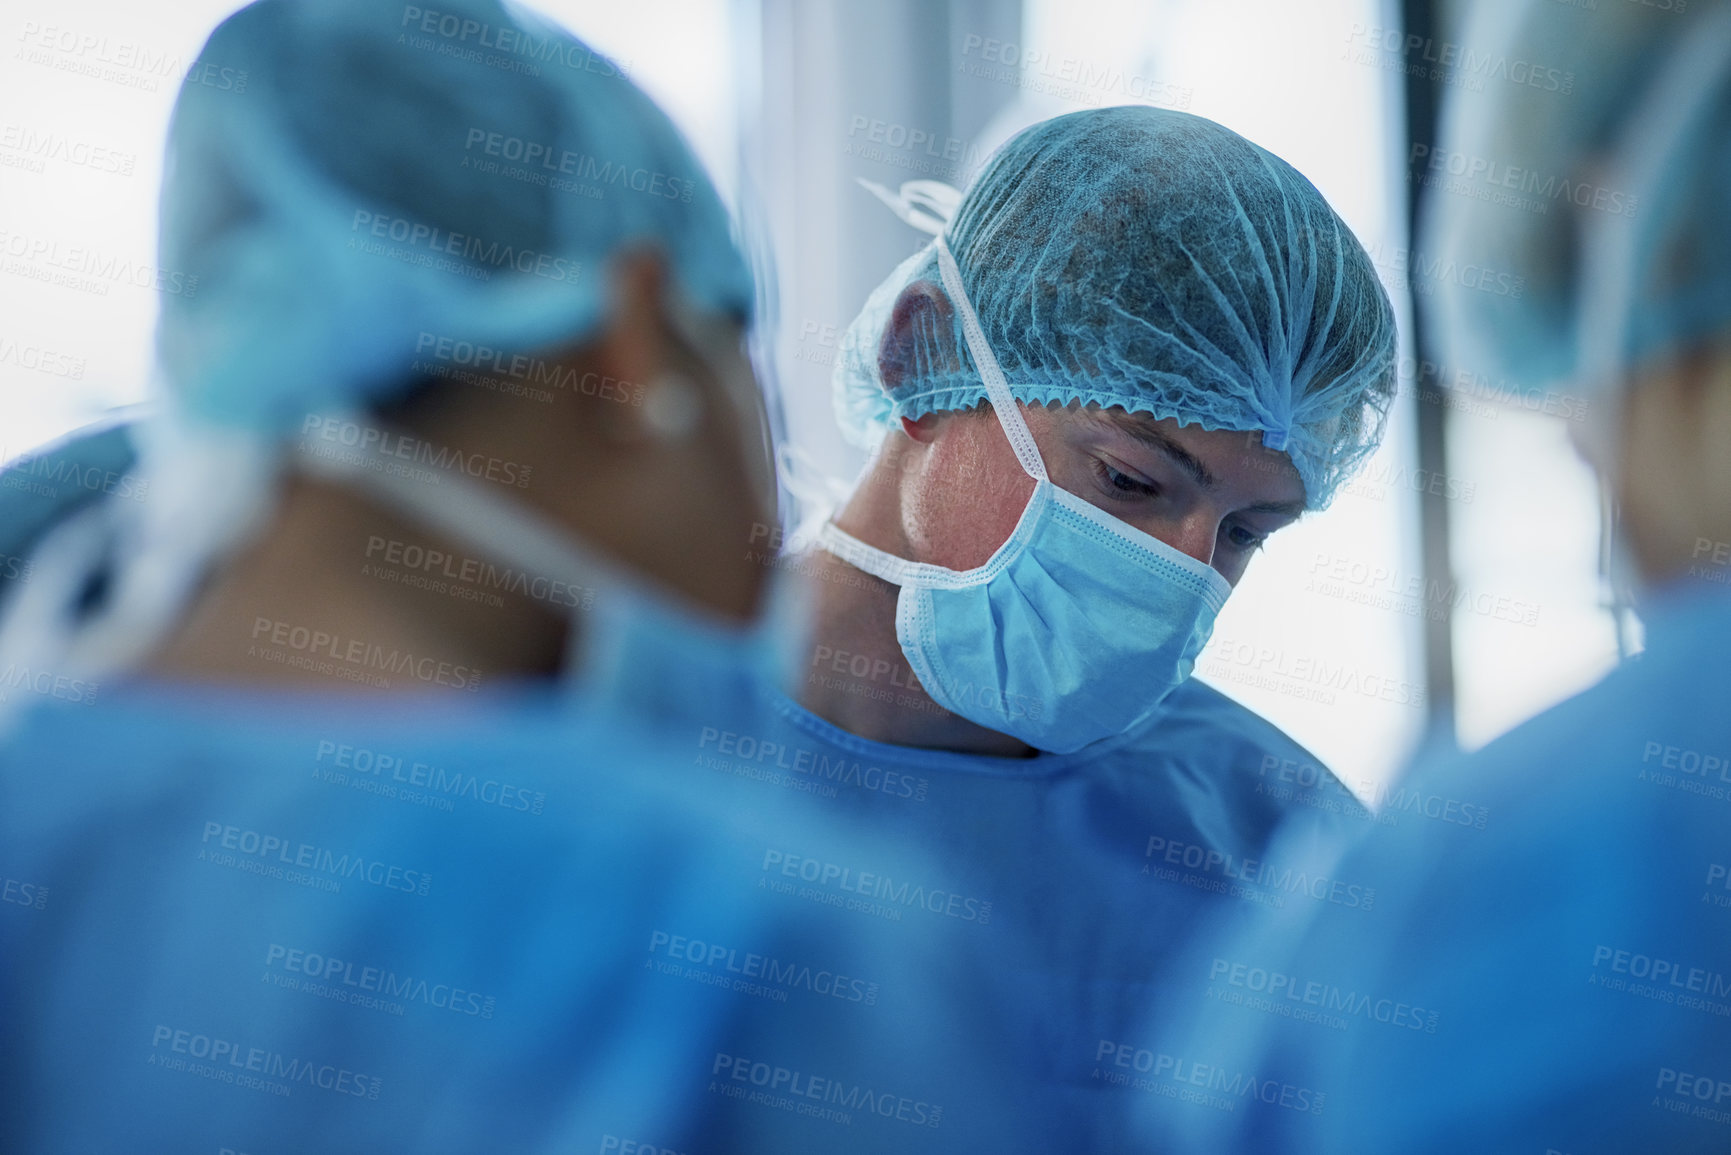 Buy stock photo Shot of a team of surgeons performing a medical procedure in an operating room